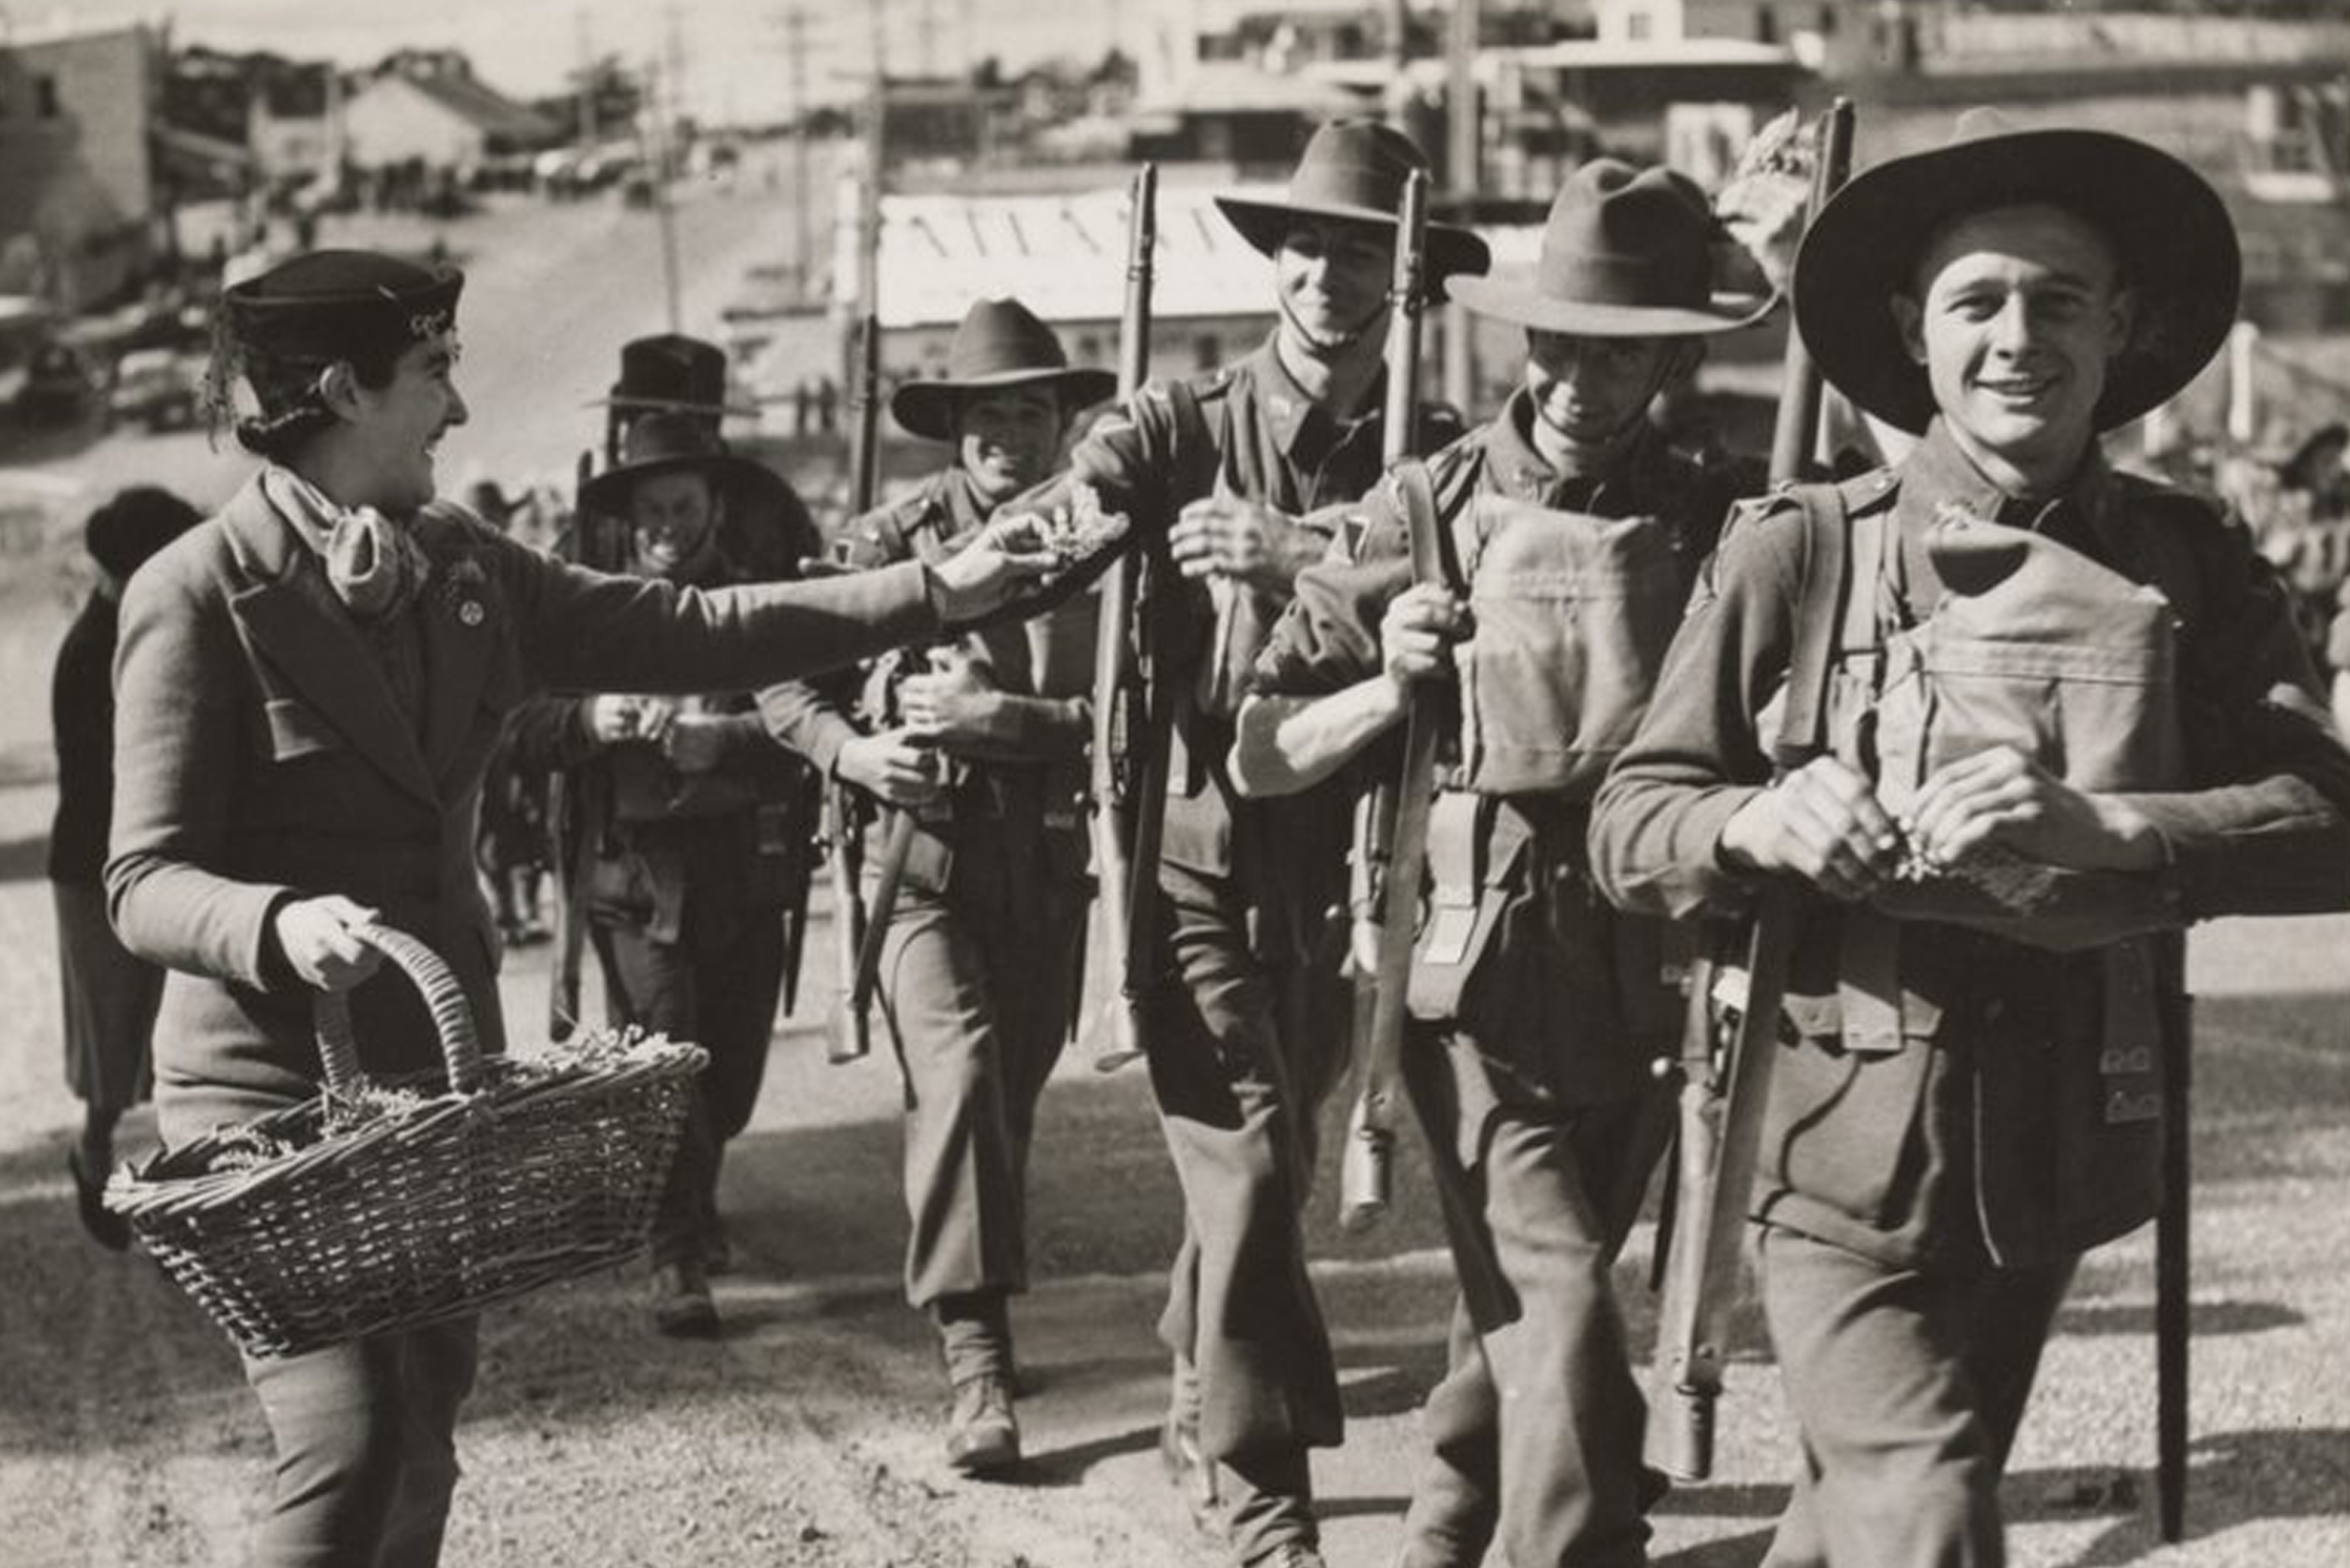  Soldiers during a march to Bathurst. ca. 1940 (World War II). A women is handing out sprigs of wattle to the soldiers as they pass. Image courtesy of Argus Newspaper Collection of Photographs, State Library of Victoria. 